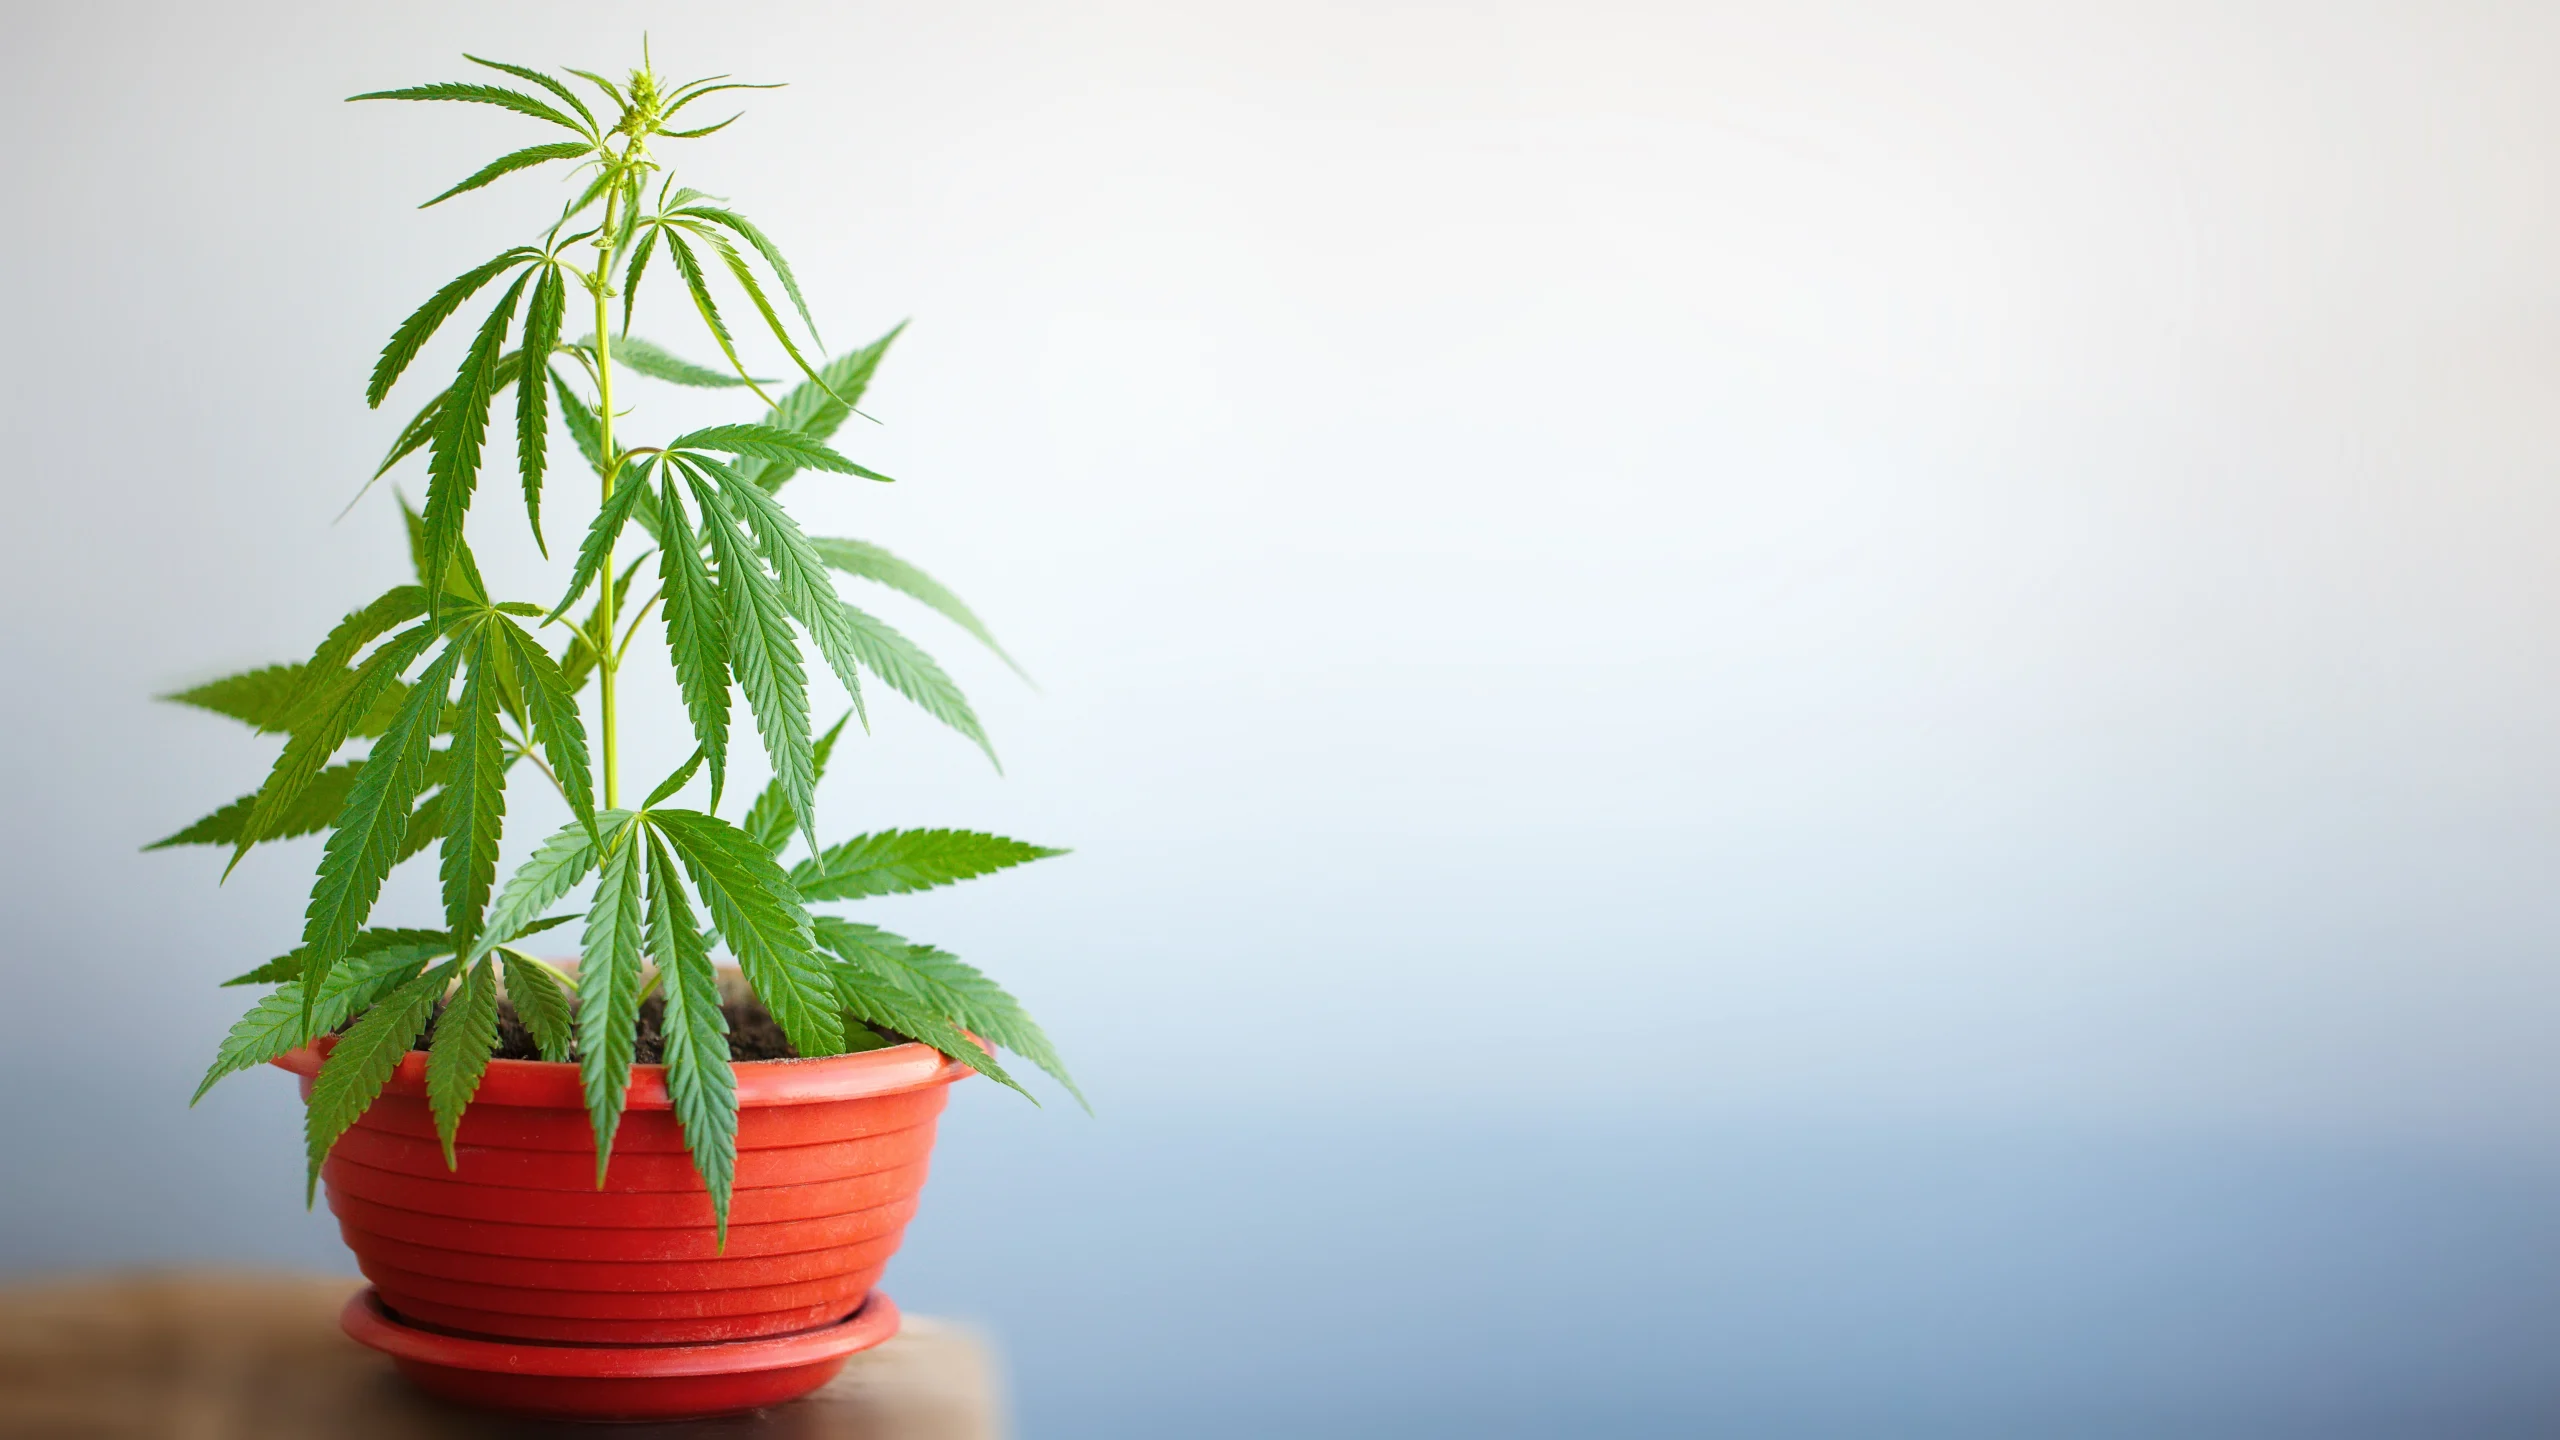 Small marijuana plant being grown in orange pot at home; is weed legal in Oklahoma City